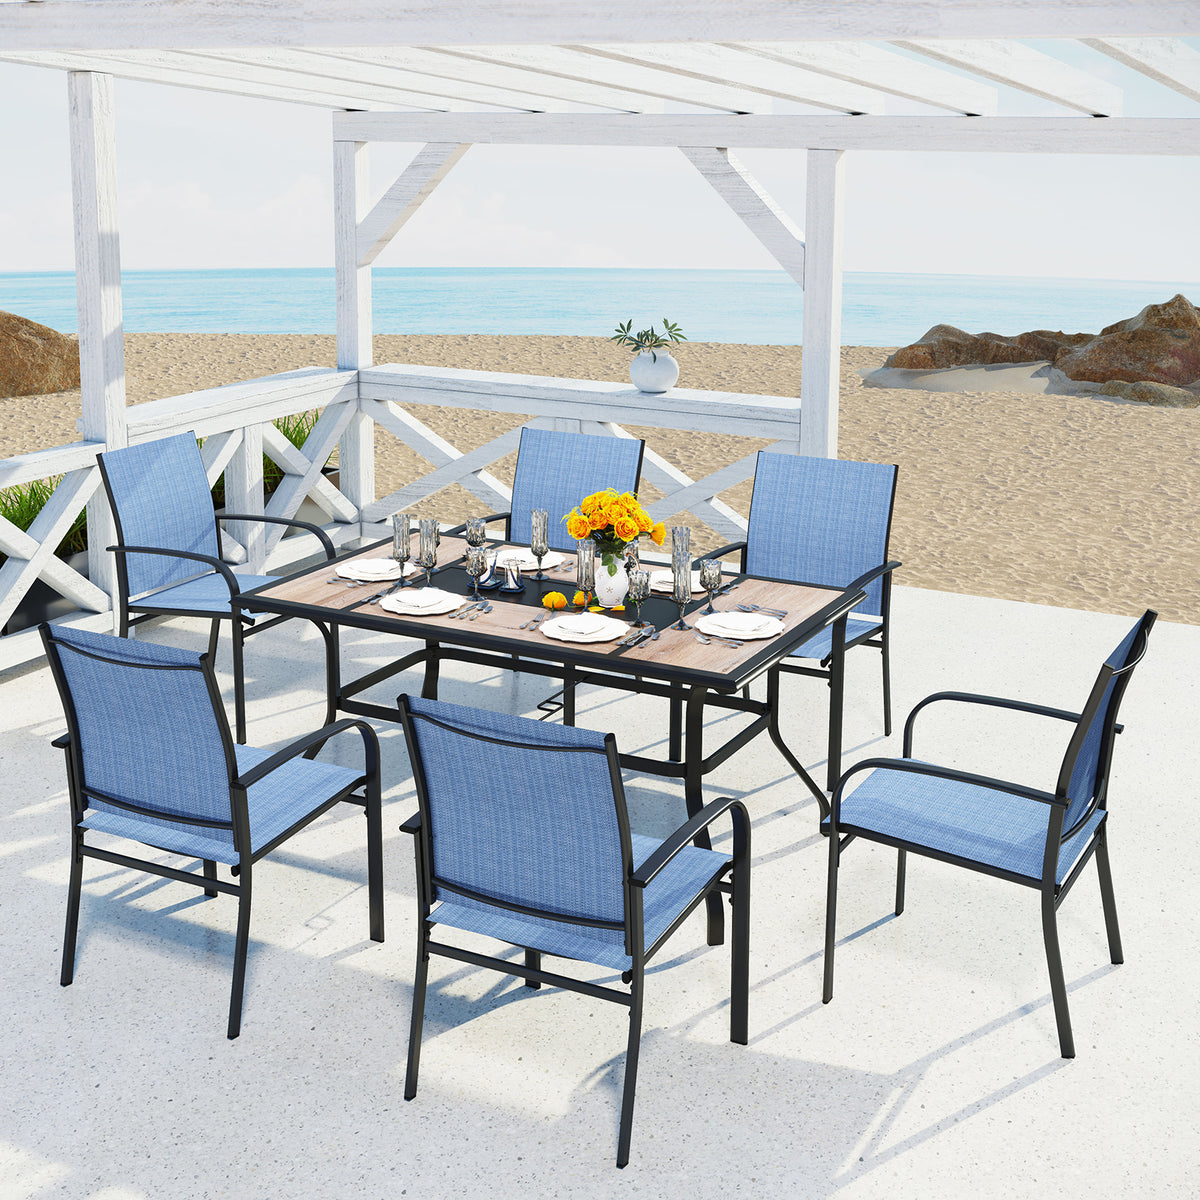 Sophia & William 7-Piece Patio Dining Sets Geometric Table & Textilene Fixed Chairs